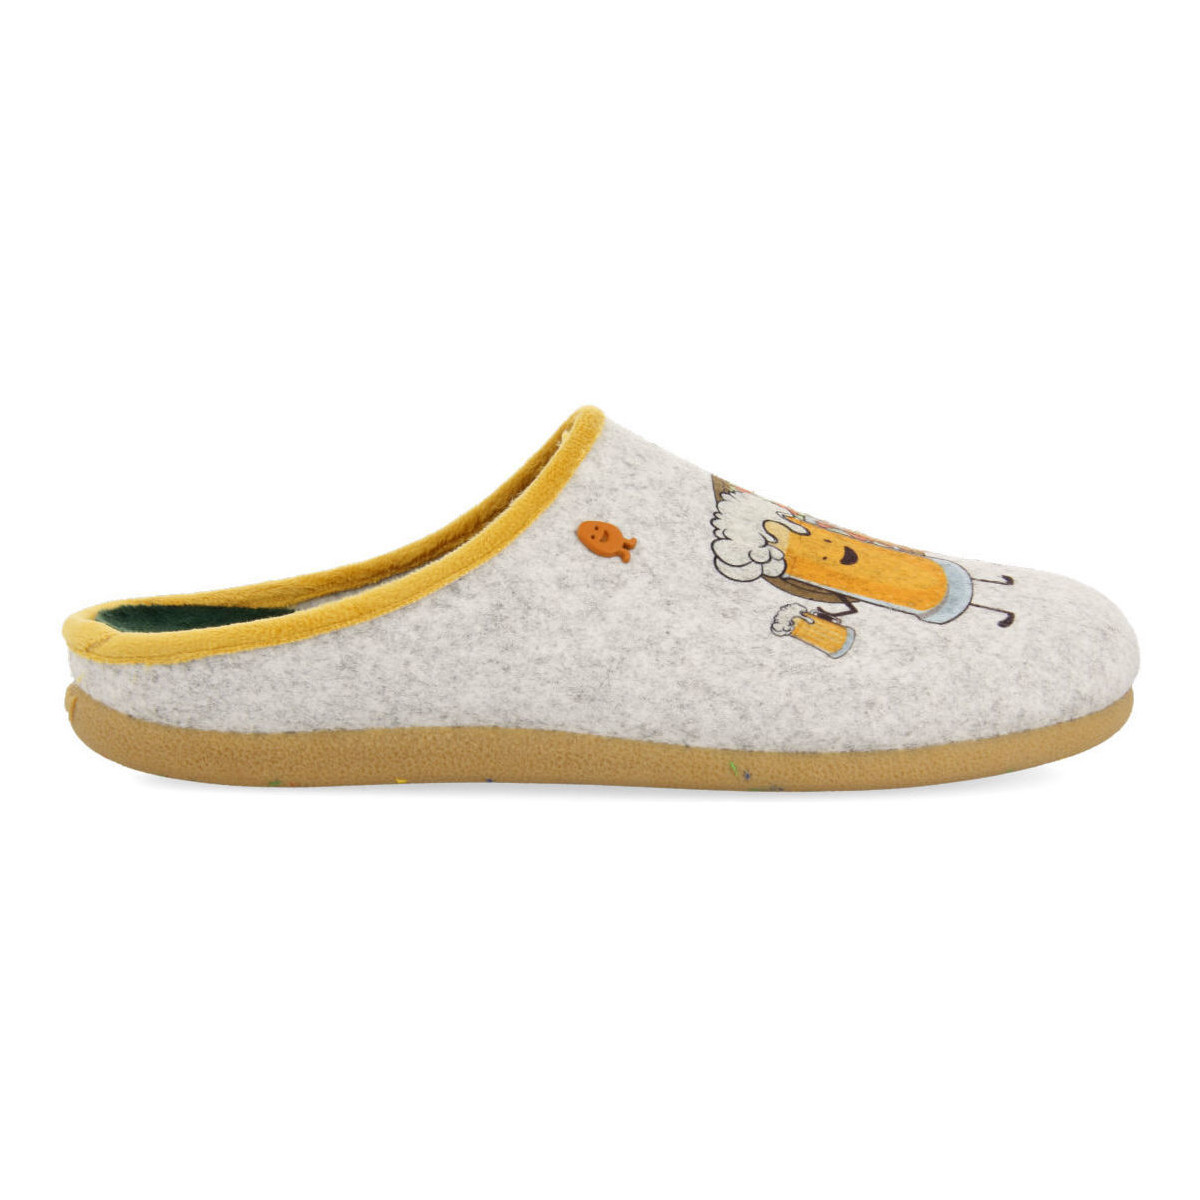 Chaussures Chaussons Gioseppo cratloe Gris